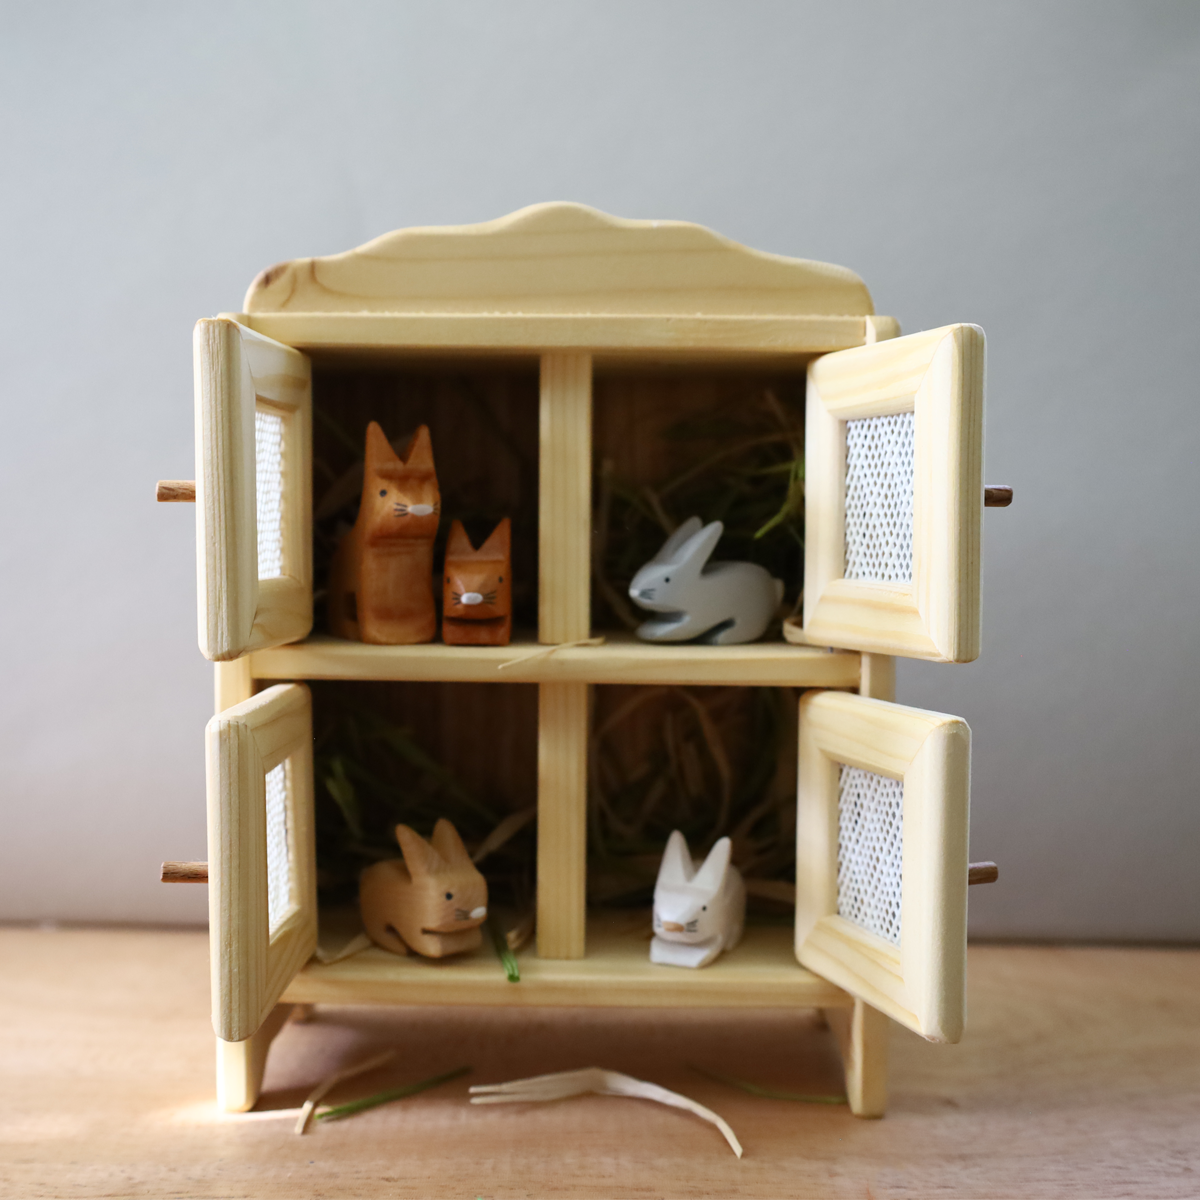 Pre-Order Atelier des Peupliers Rabbit Hutch (Ships in early-to-mid-April)